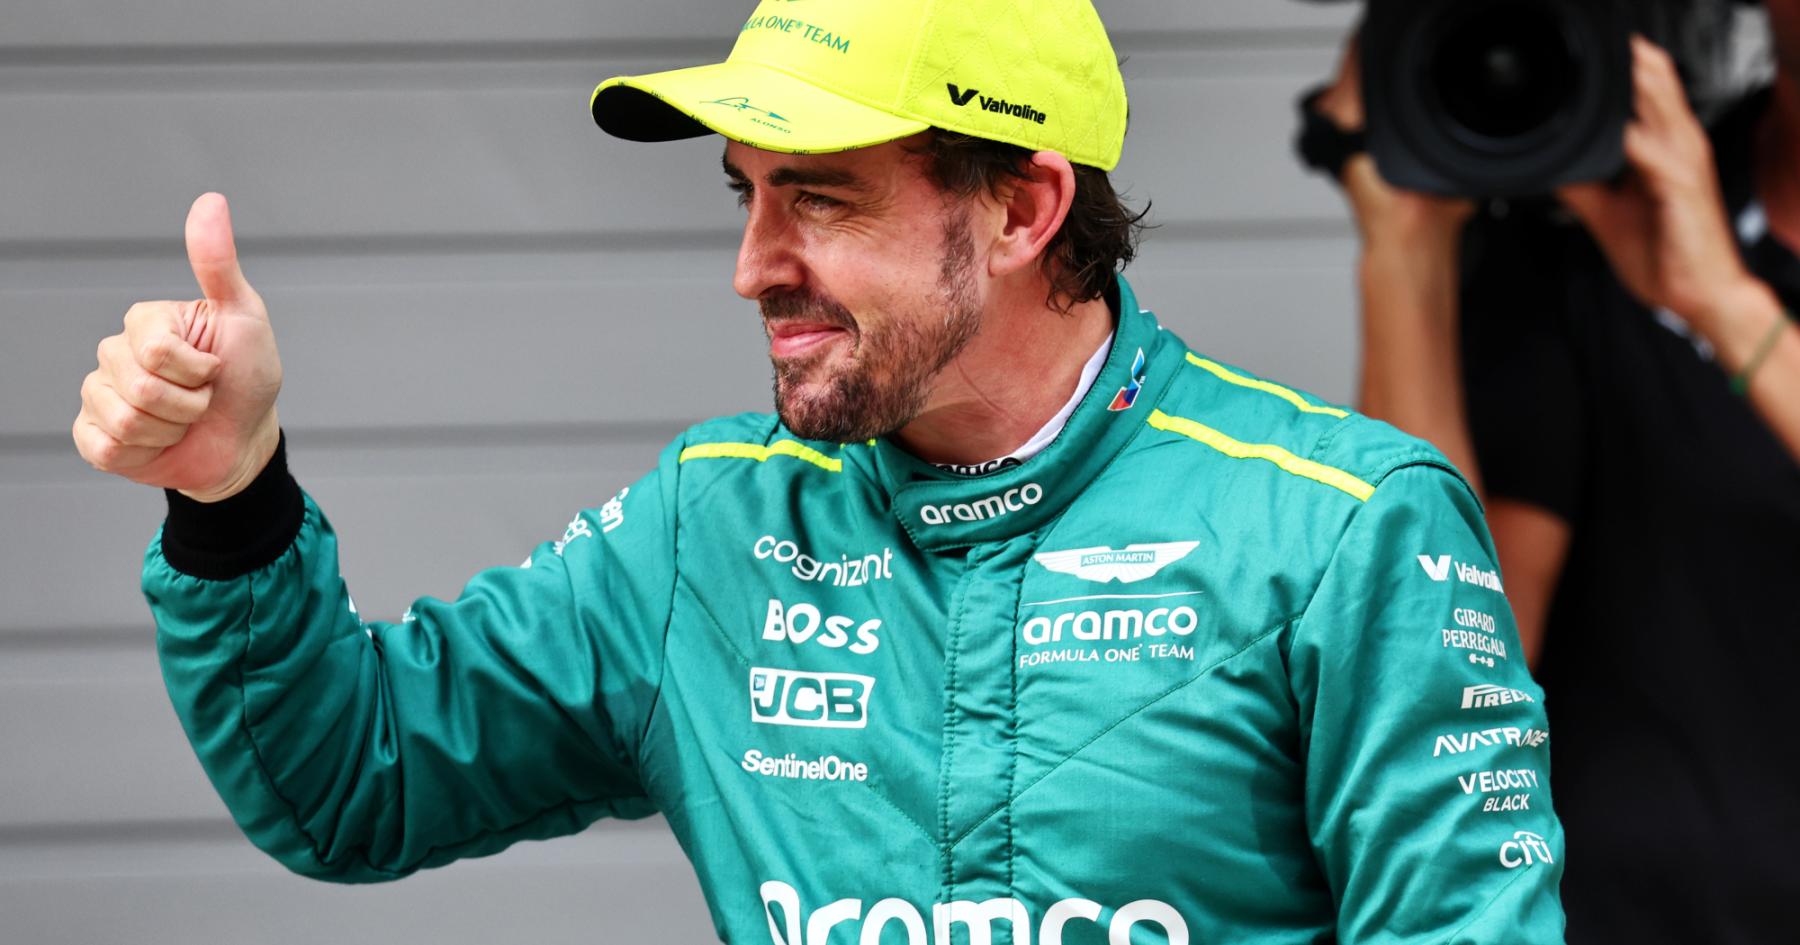 Alonso seeking clarity after being given 'hardest penalties'